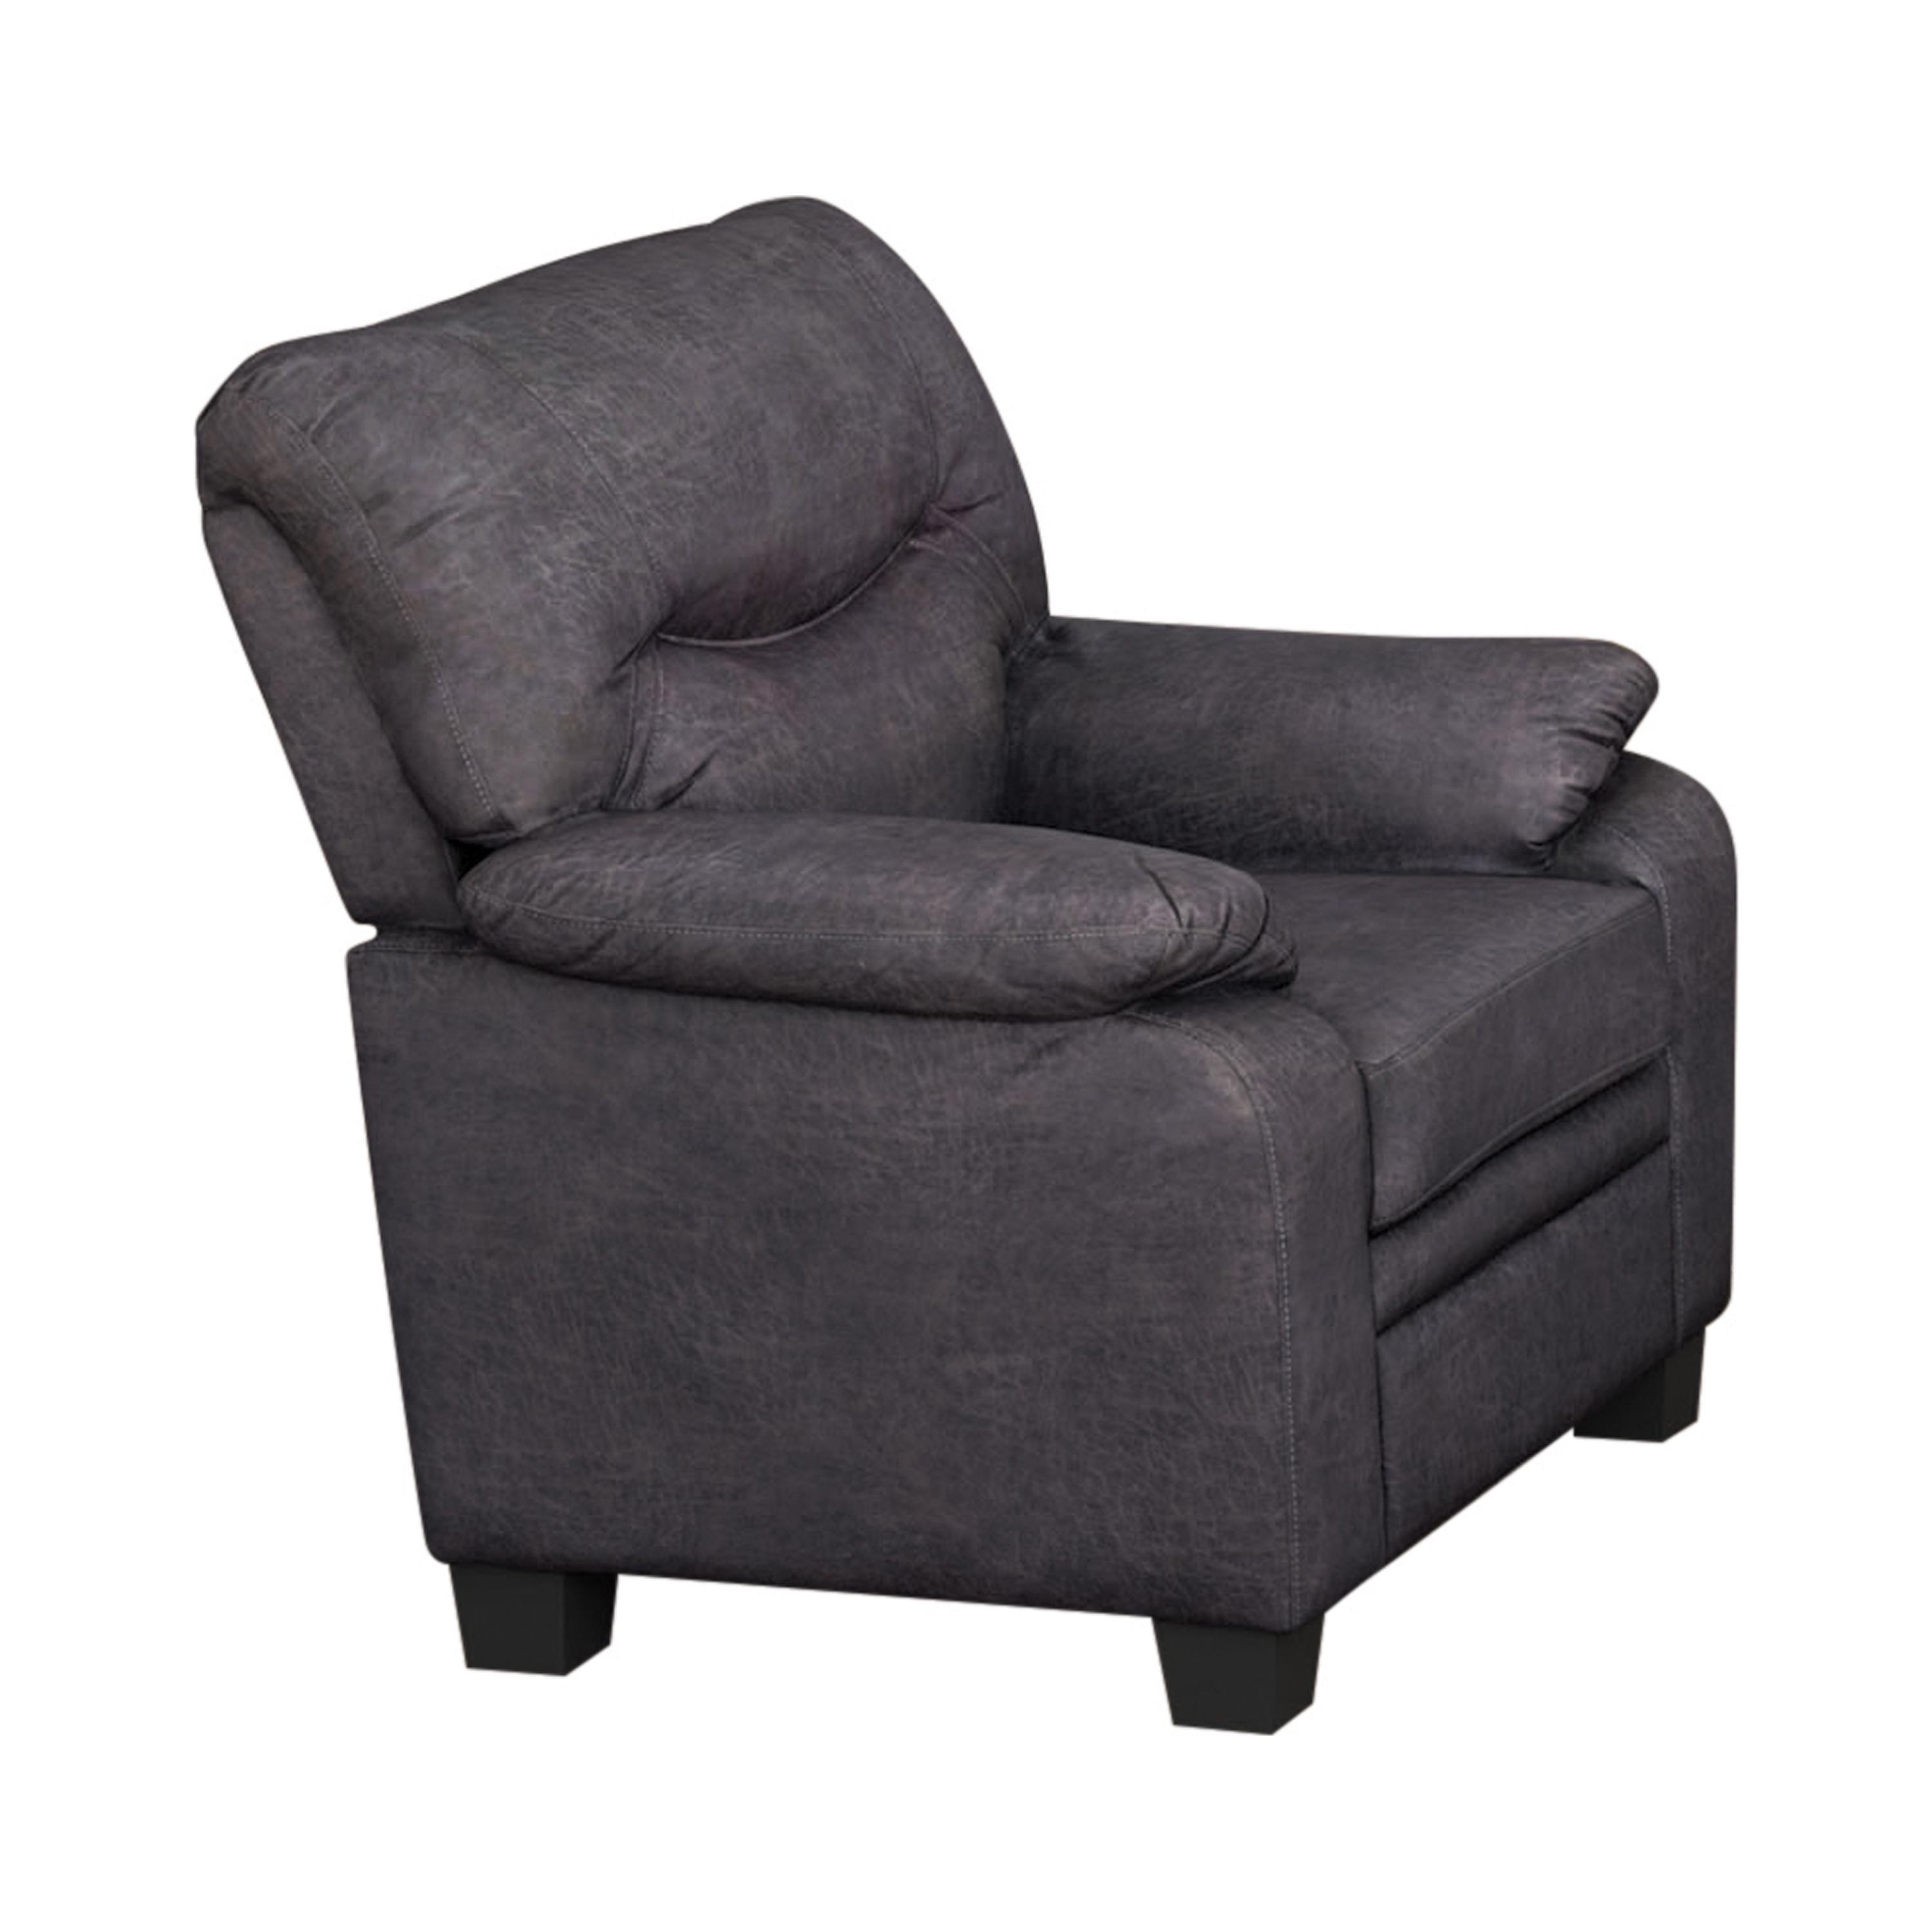 Classic Arm Chair 506566 Meagan 506566 in Charcoal 